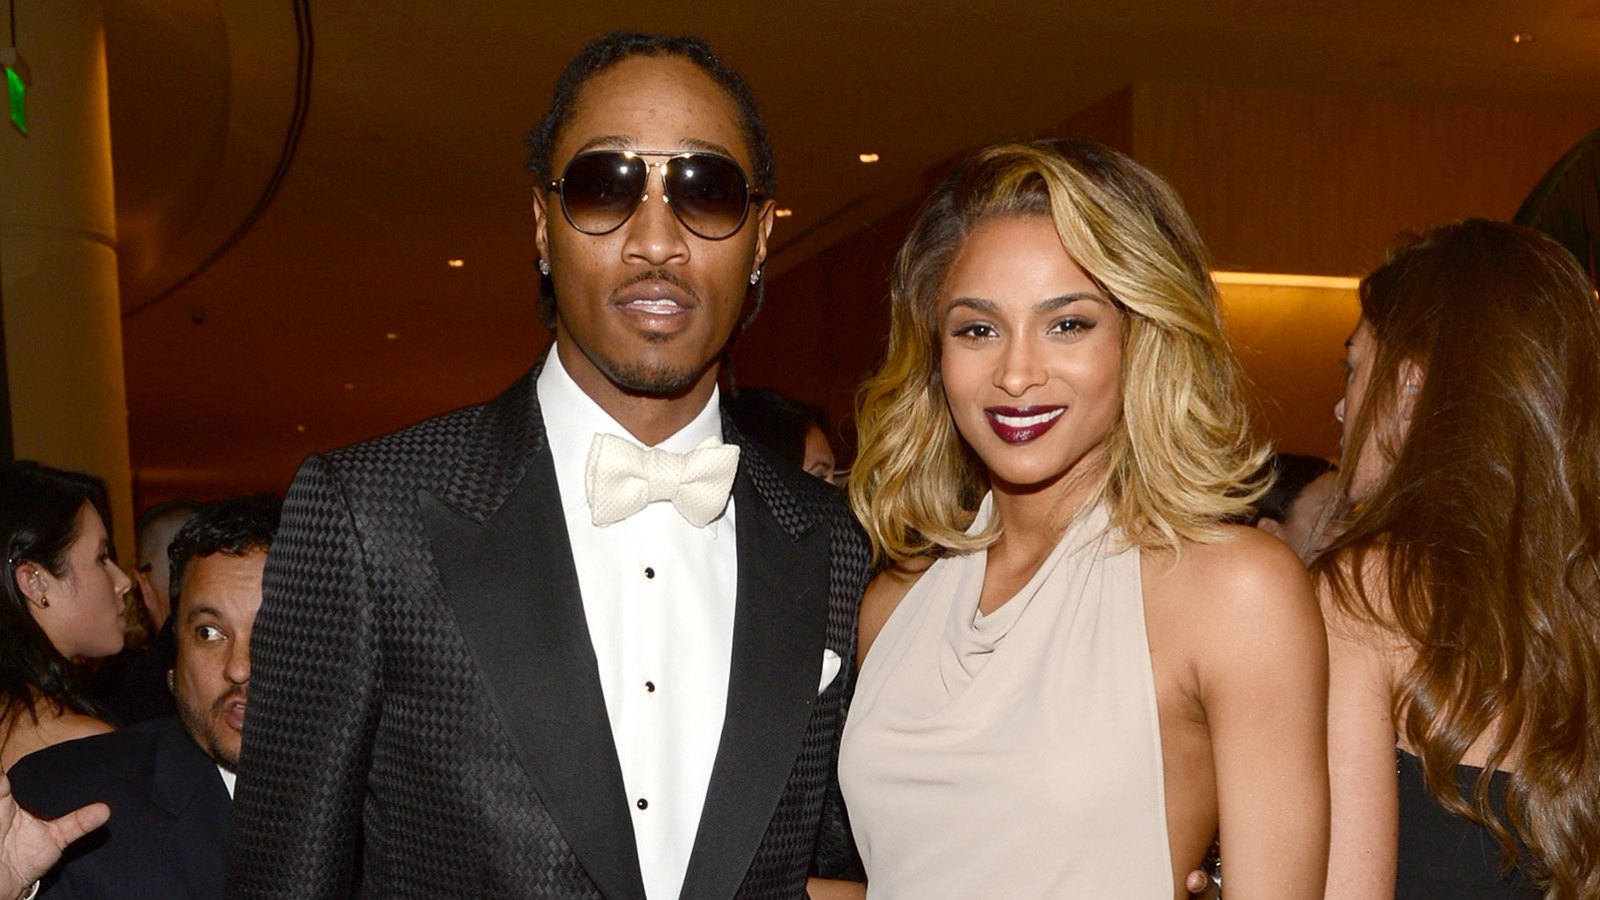 Ciara Speaks On When She Knew It Was Time To Leave Ex Future